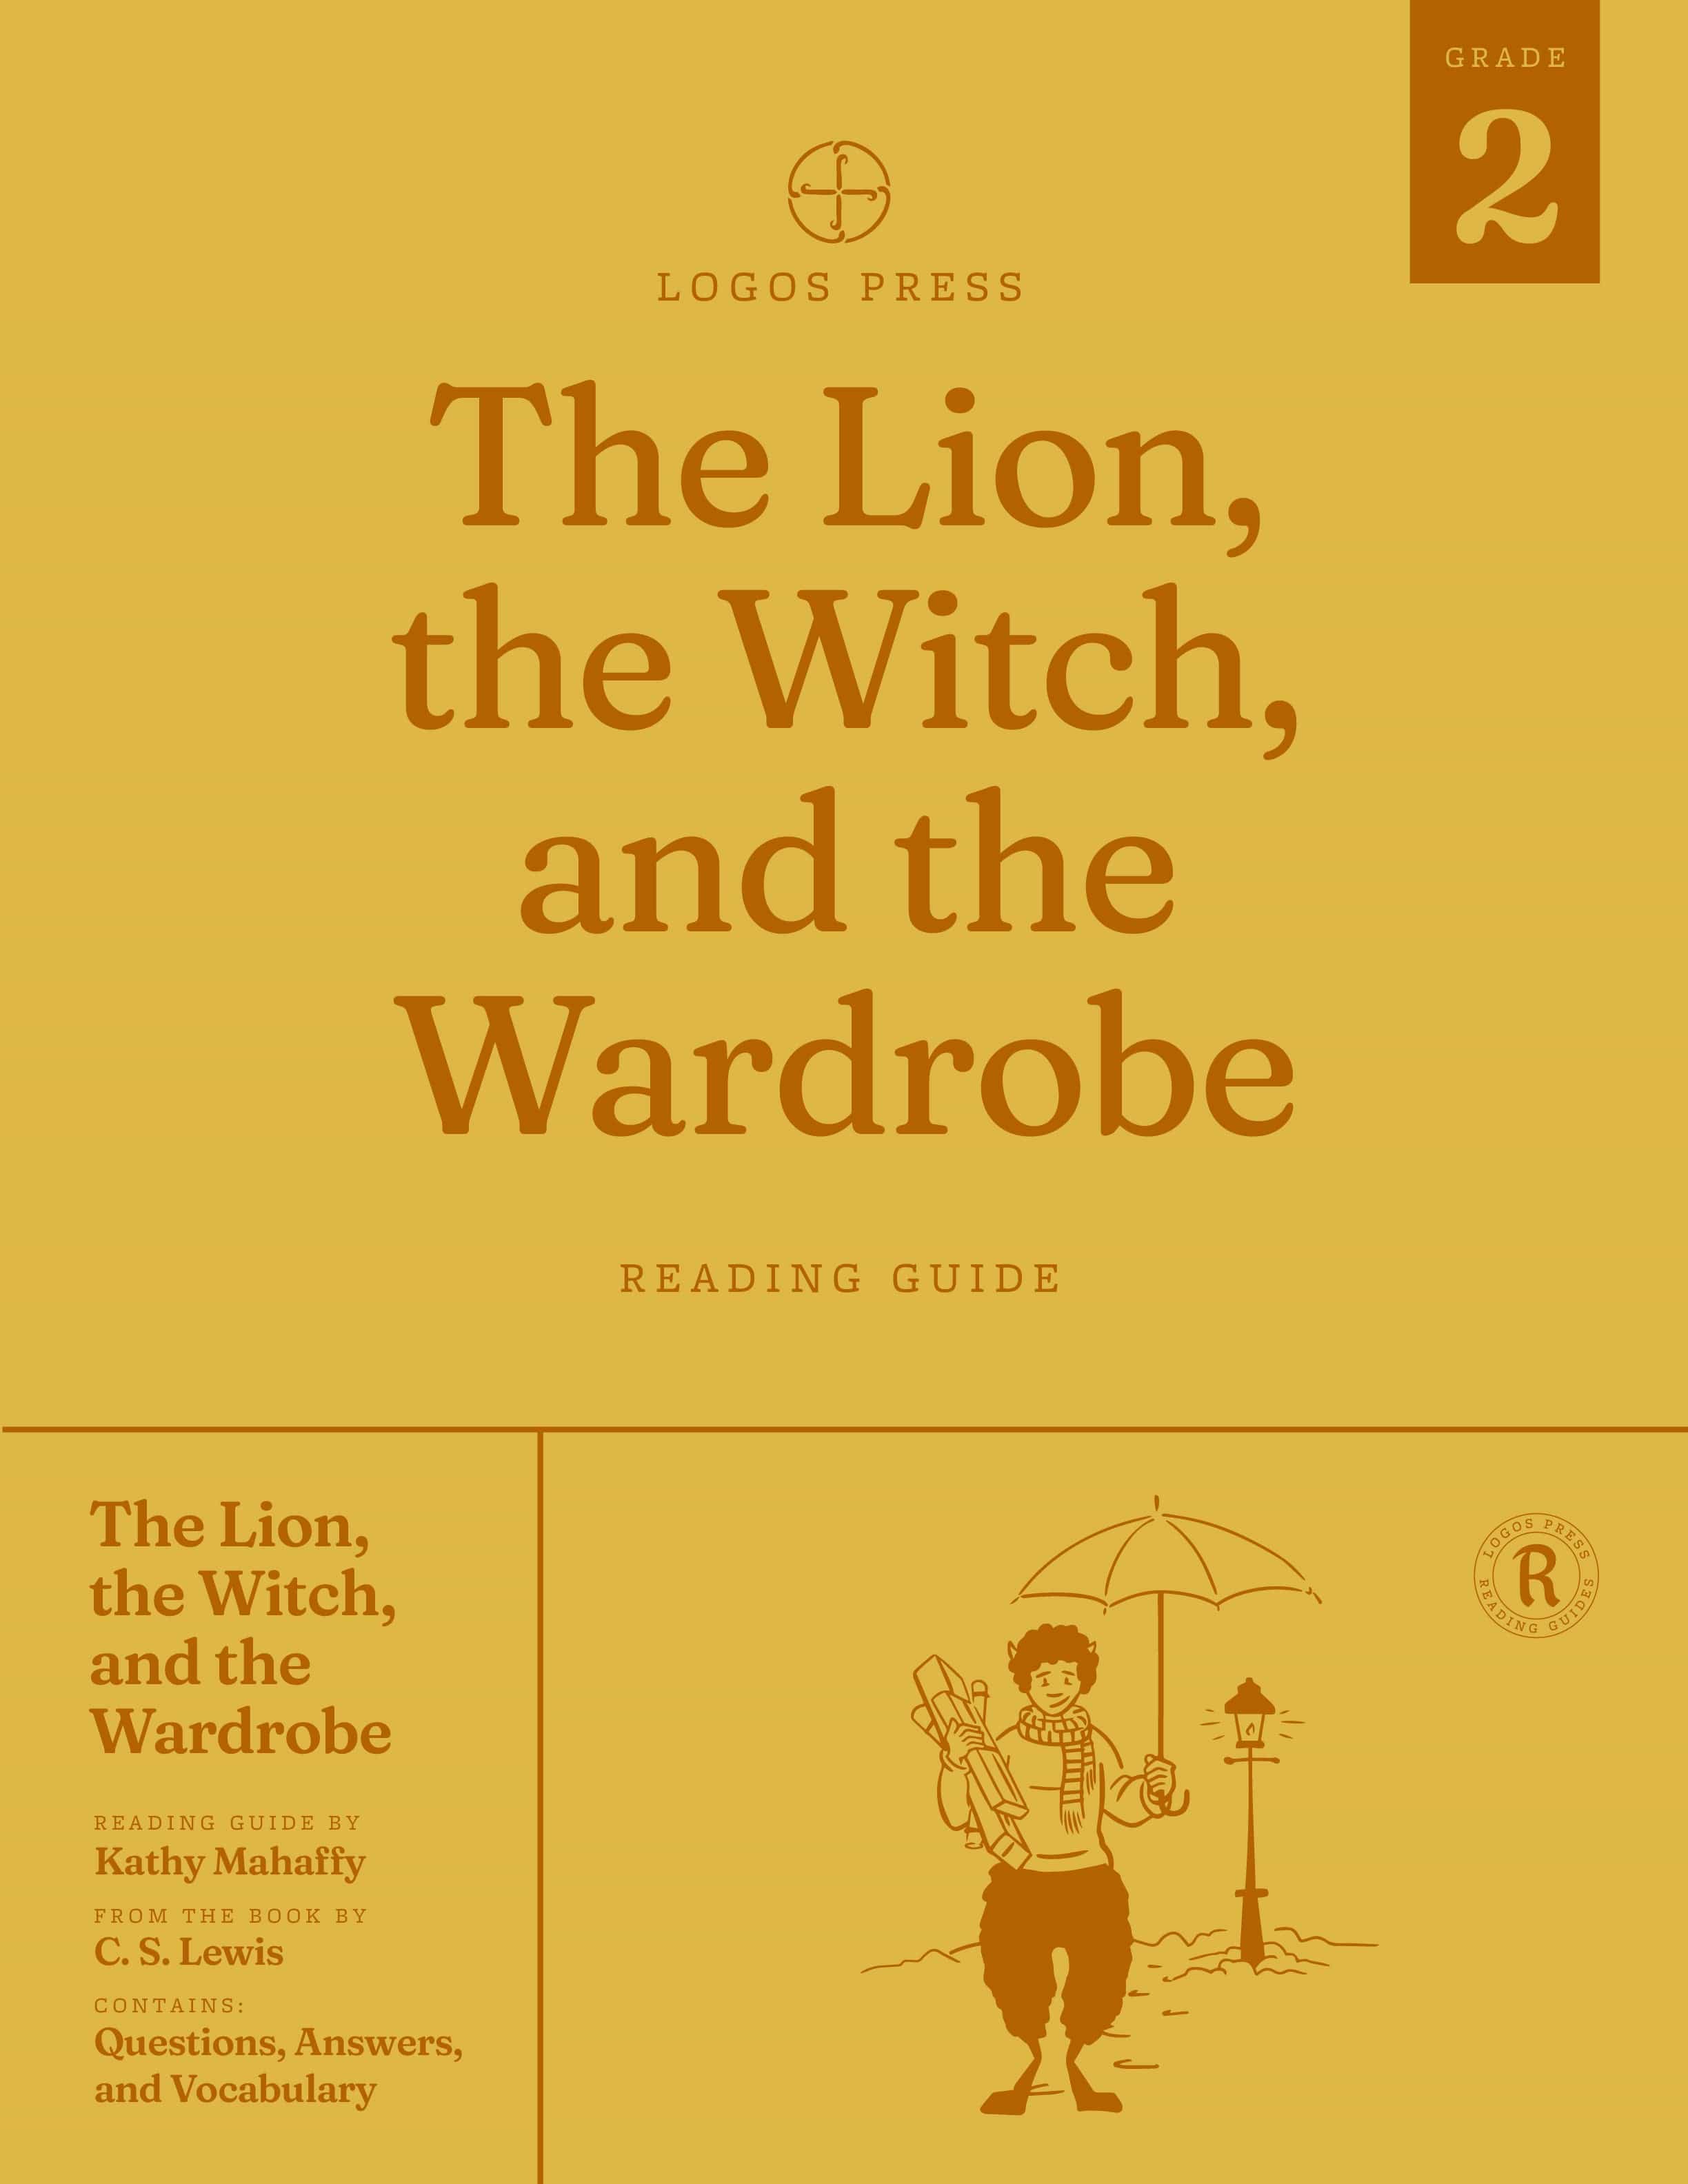 The Lion, the Witch, and the Wardrobe - Reading Guide (Download)